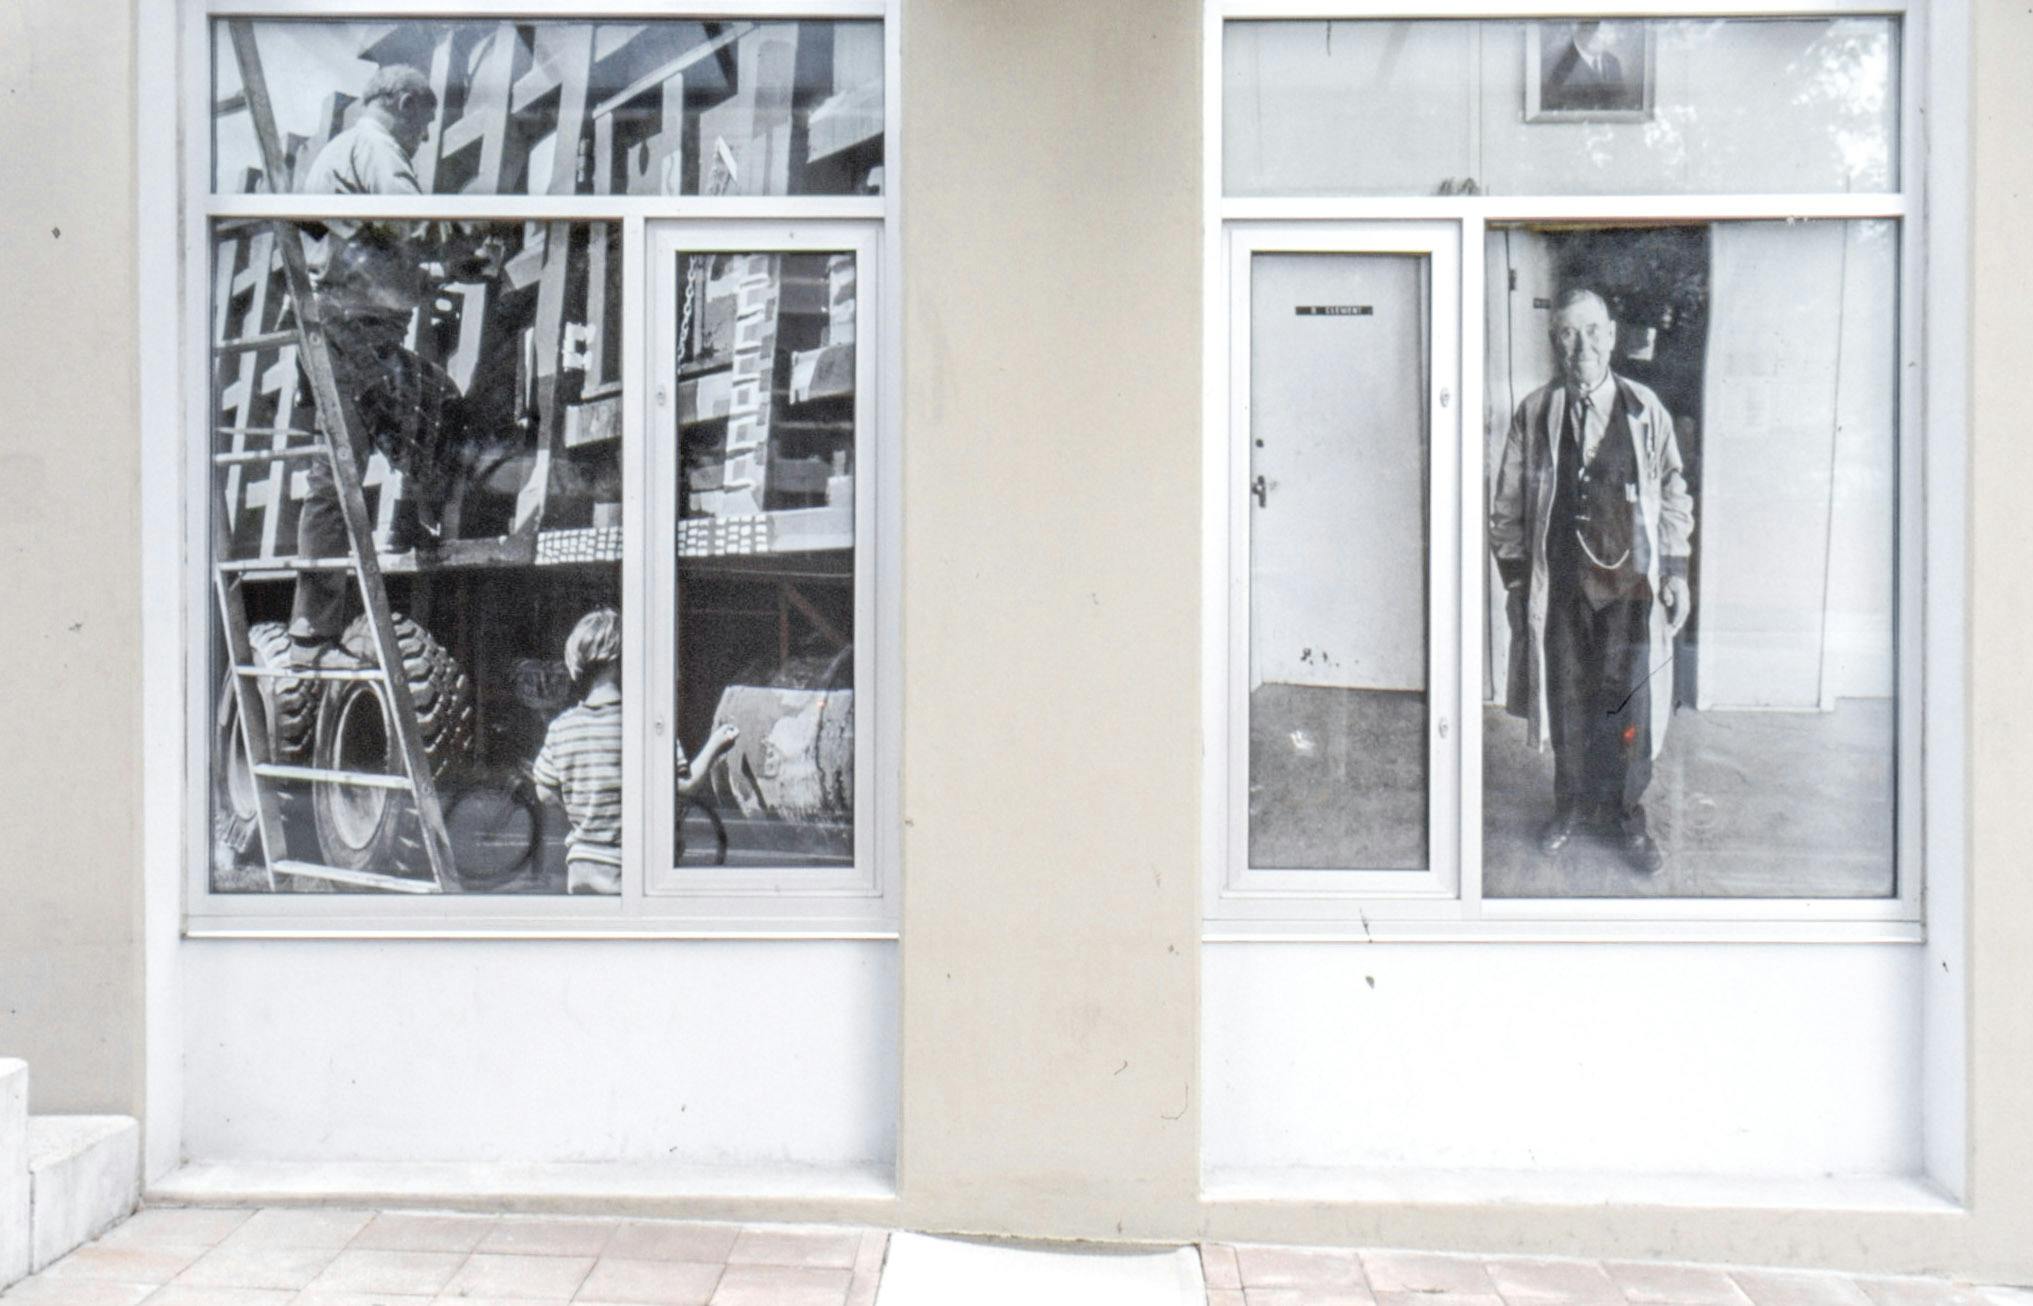 Two of CAG’s window spaces are visible in this photograph. Enlarged images from different black and white photographs cover those windows. Both images depict people but in different social settings.